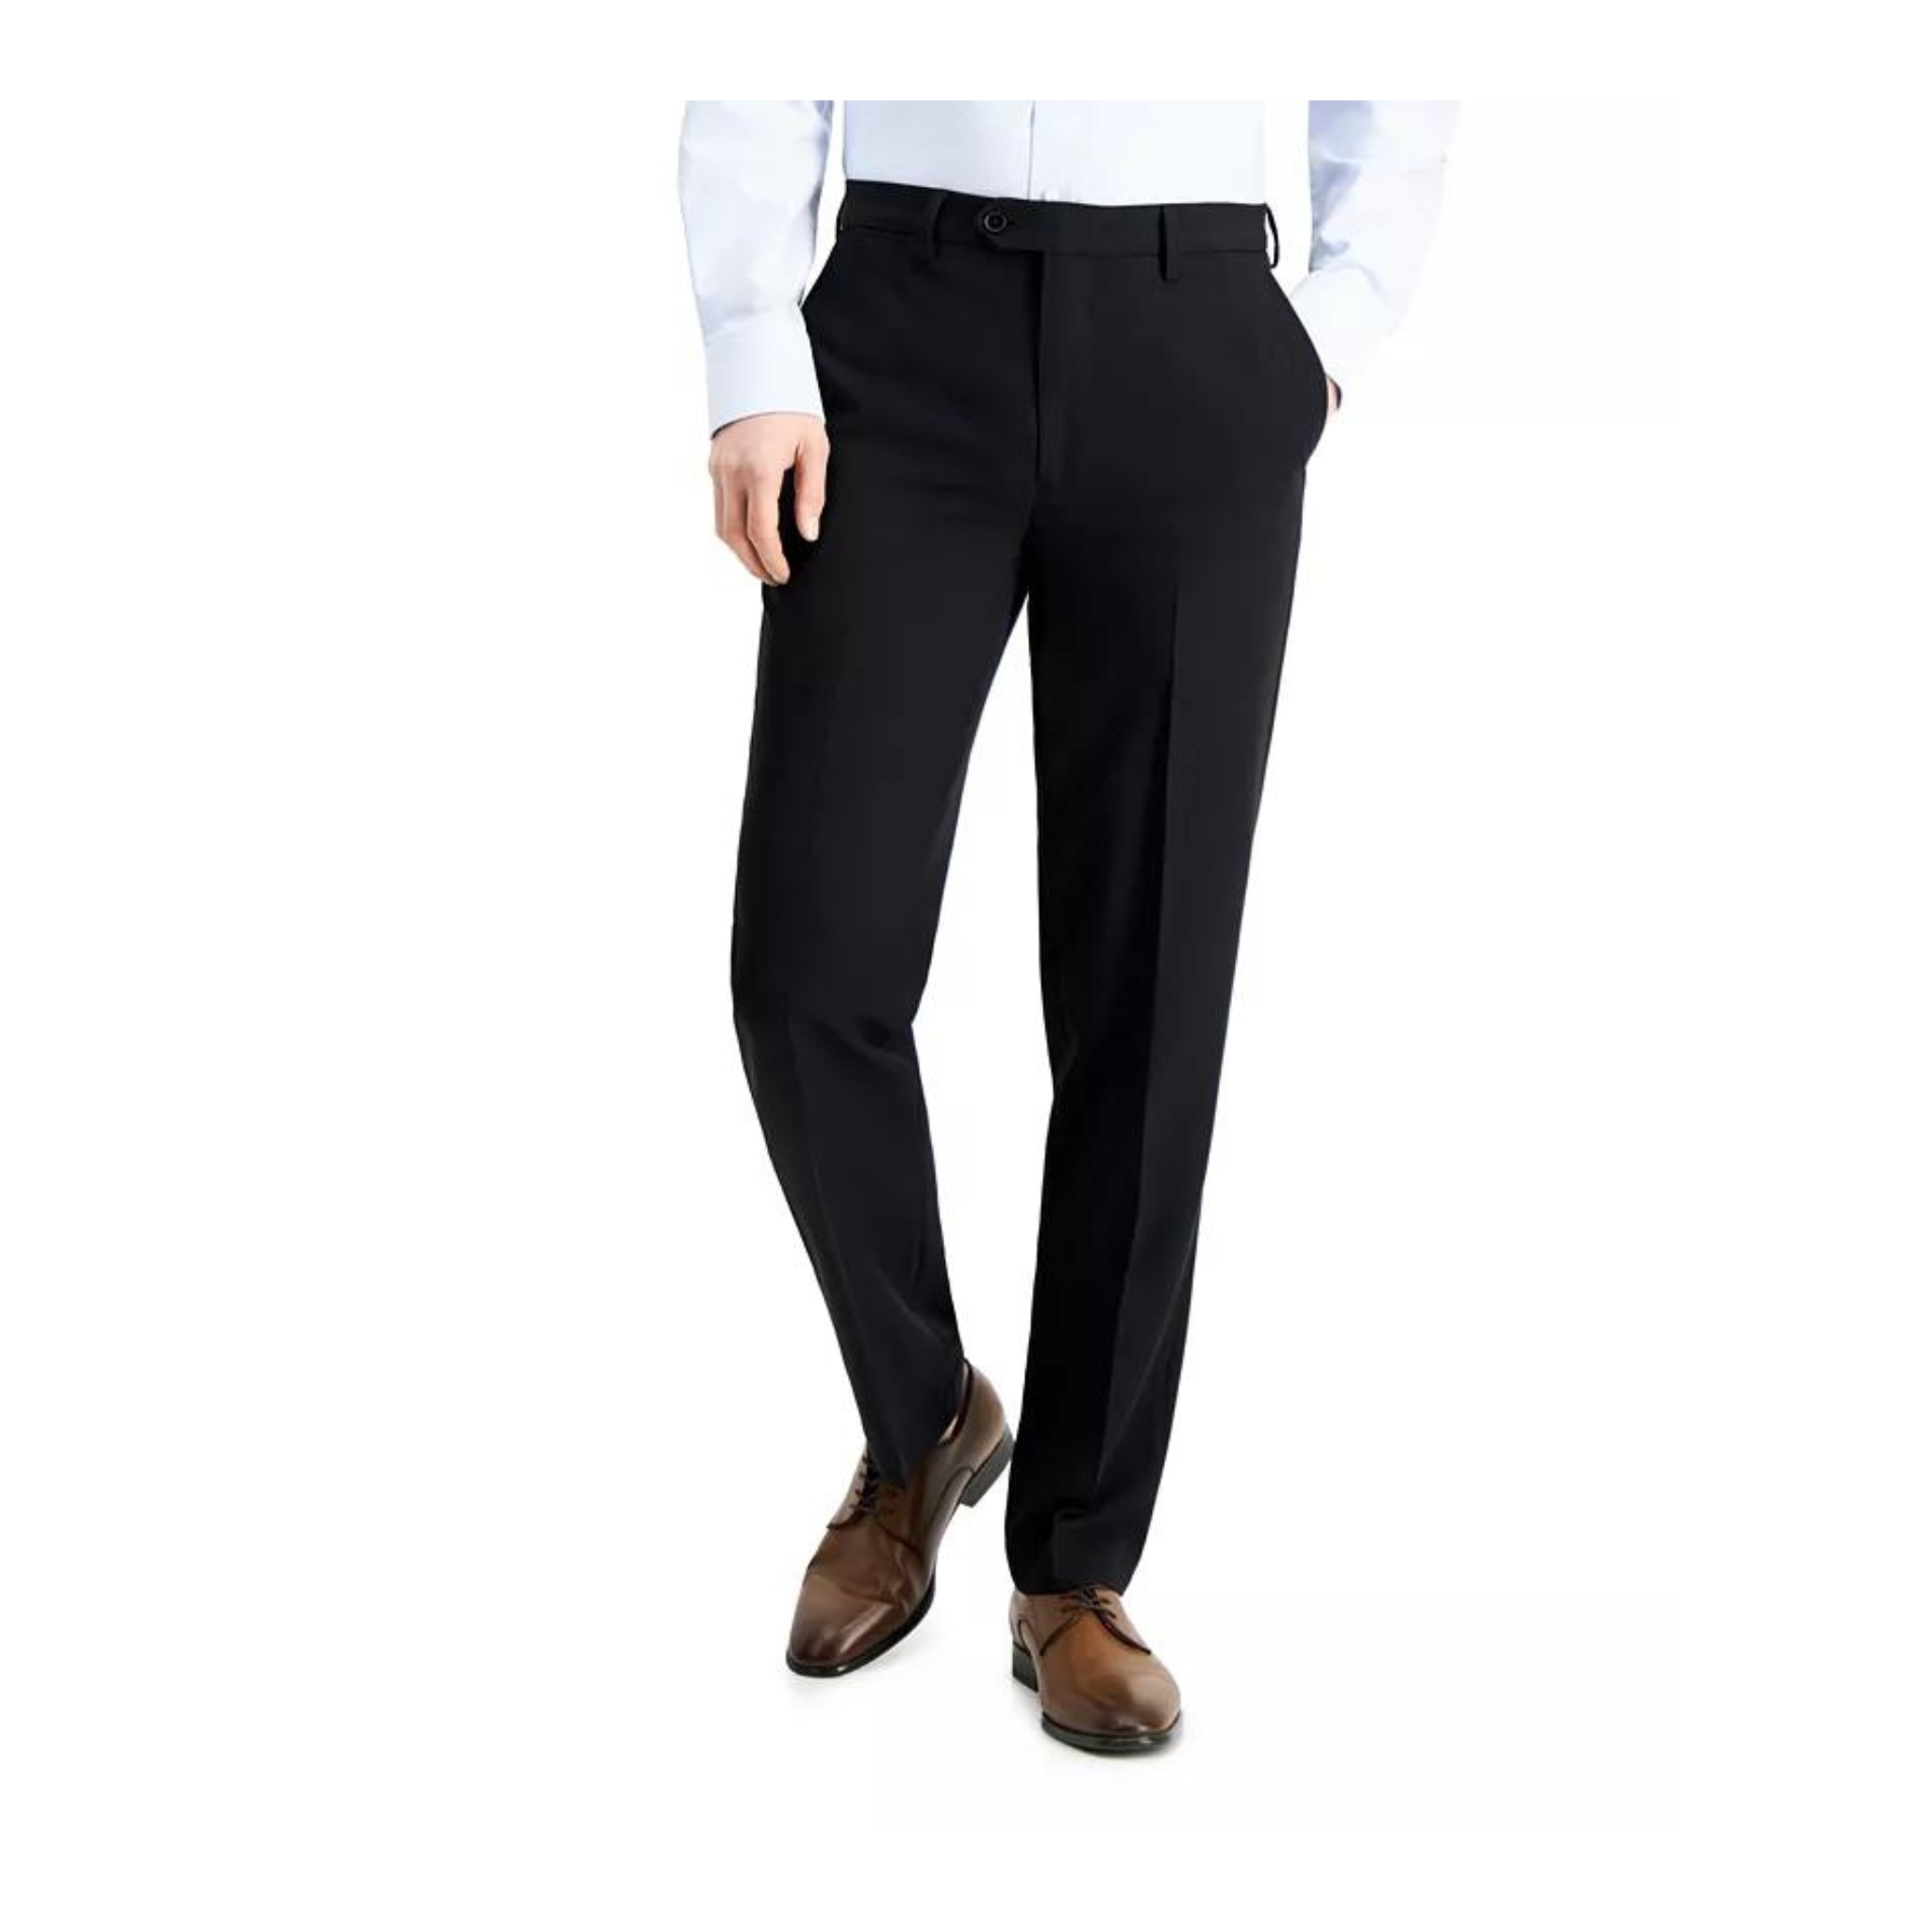 Limited-Time Special on Pants From Nautica, DKNY, Perry Ellis, and More